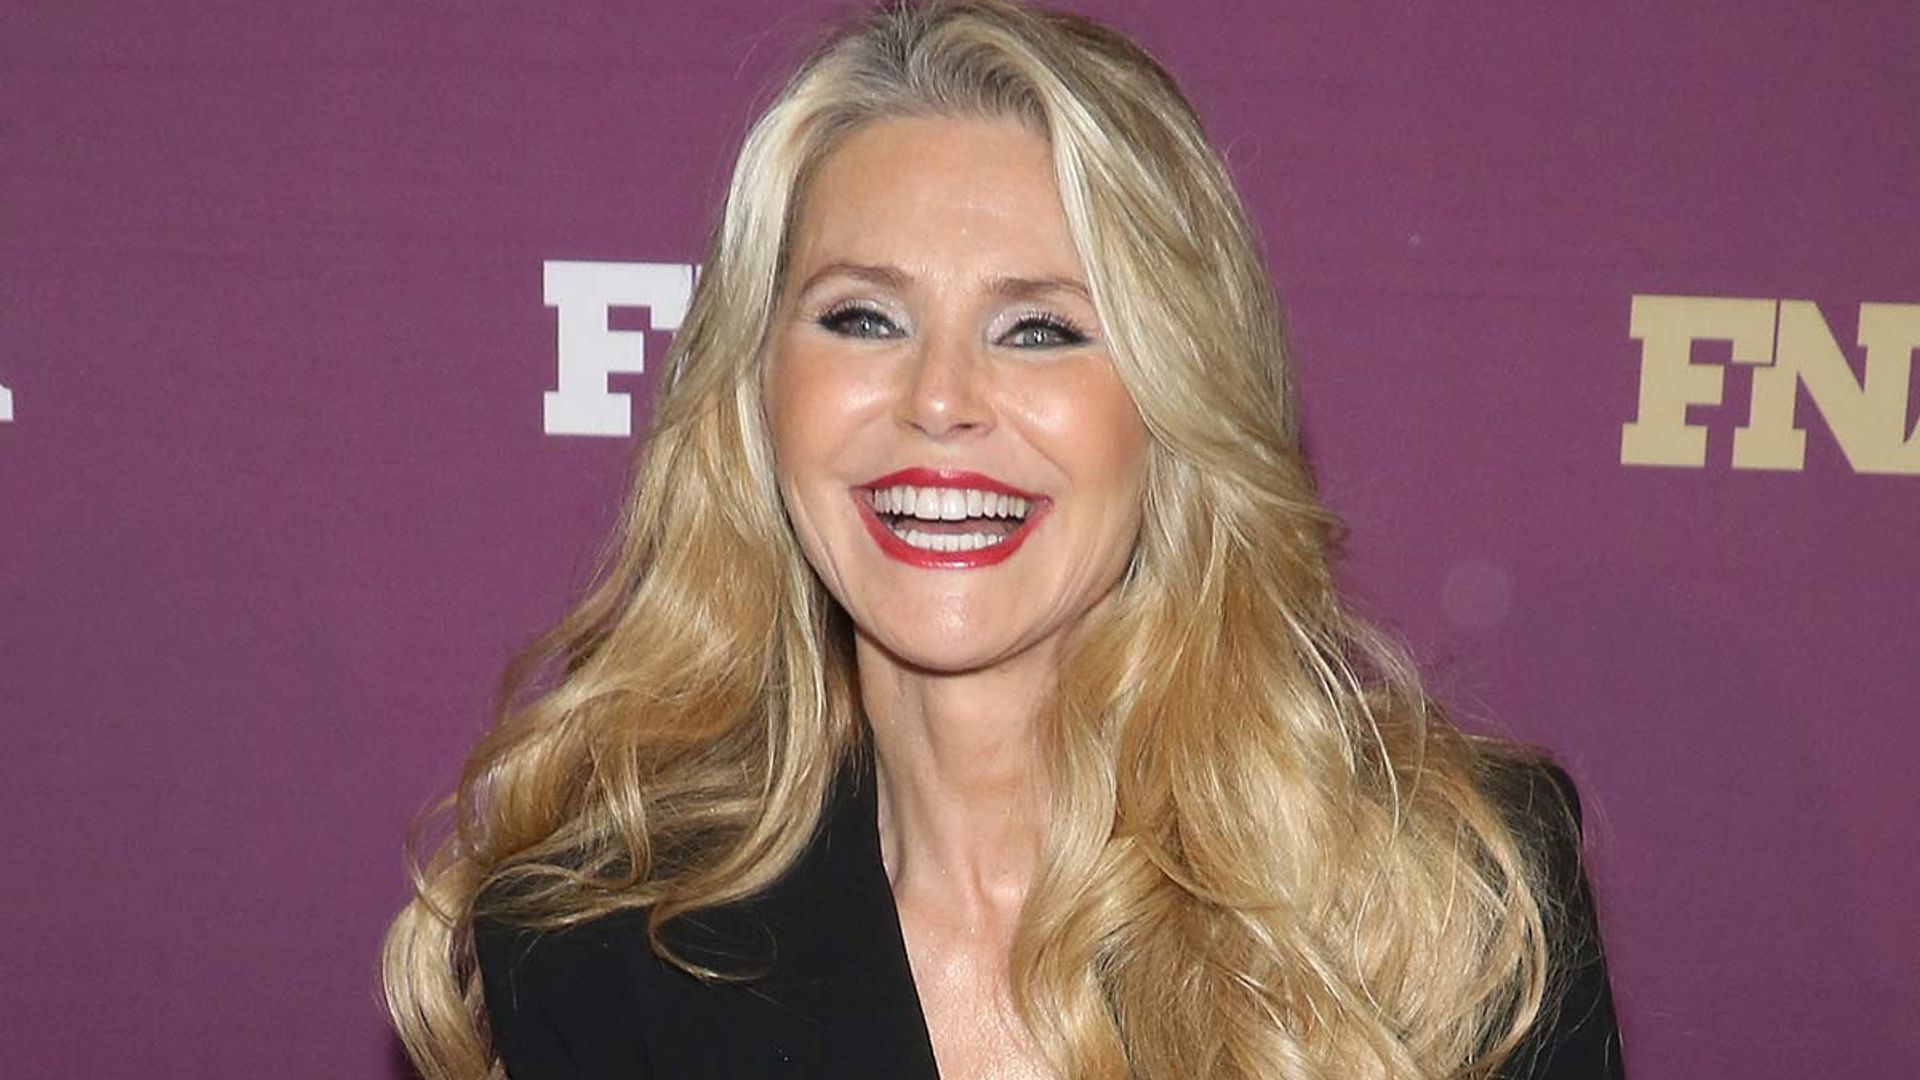 Christie Brinkley stuns in semi-sheer dress in gorgeous sun-soaked photo